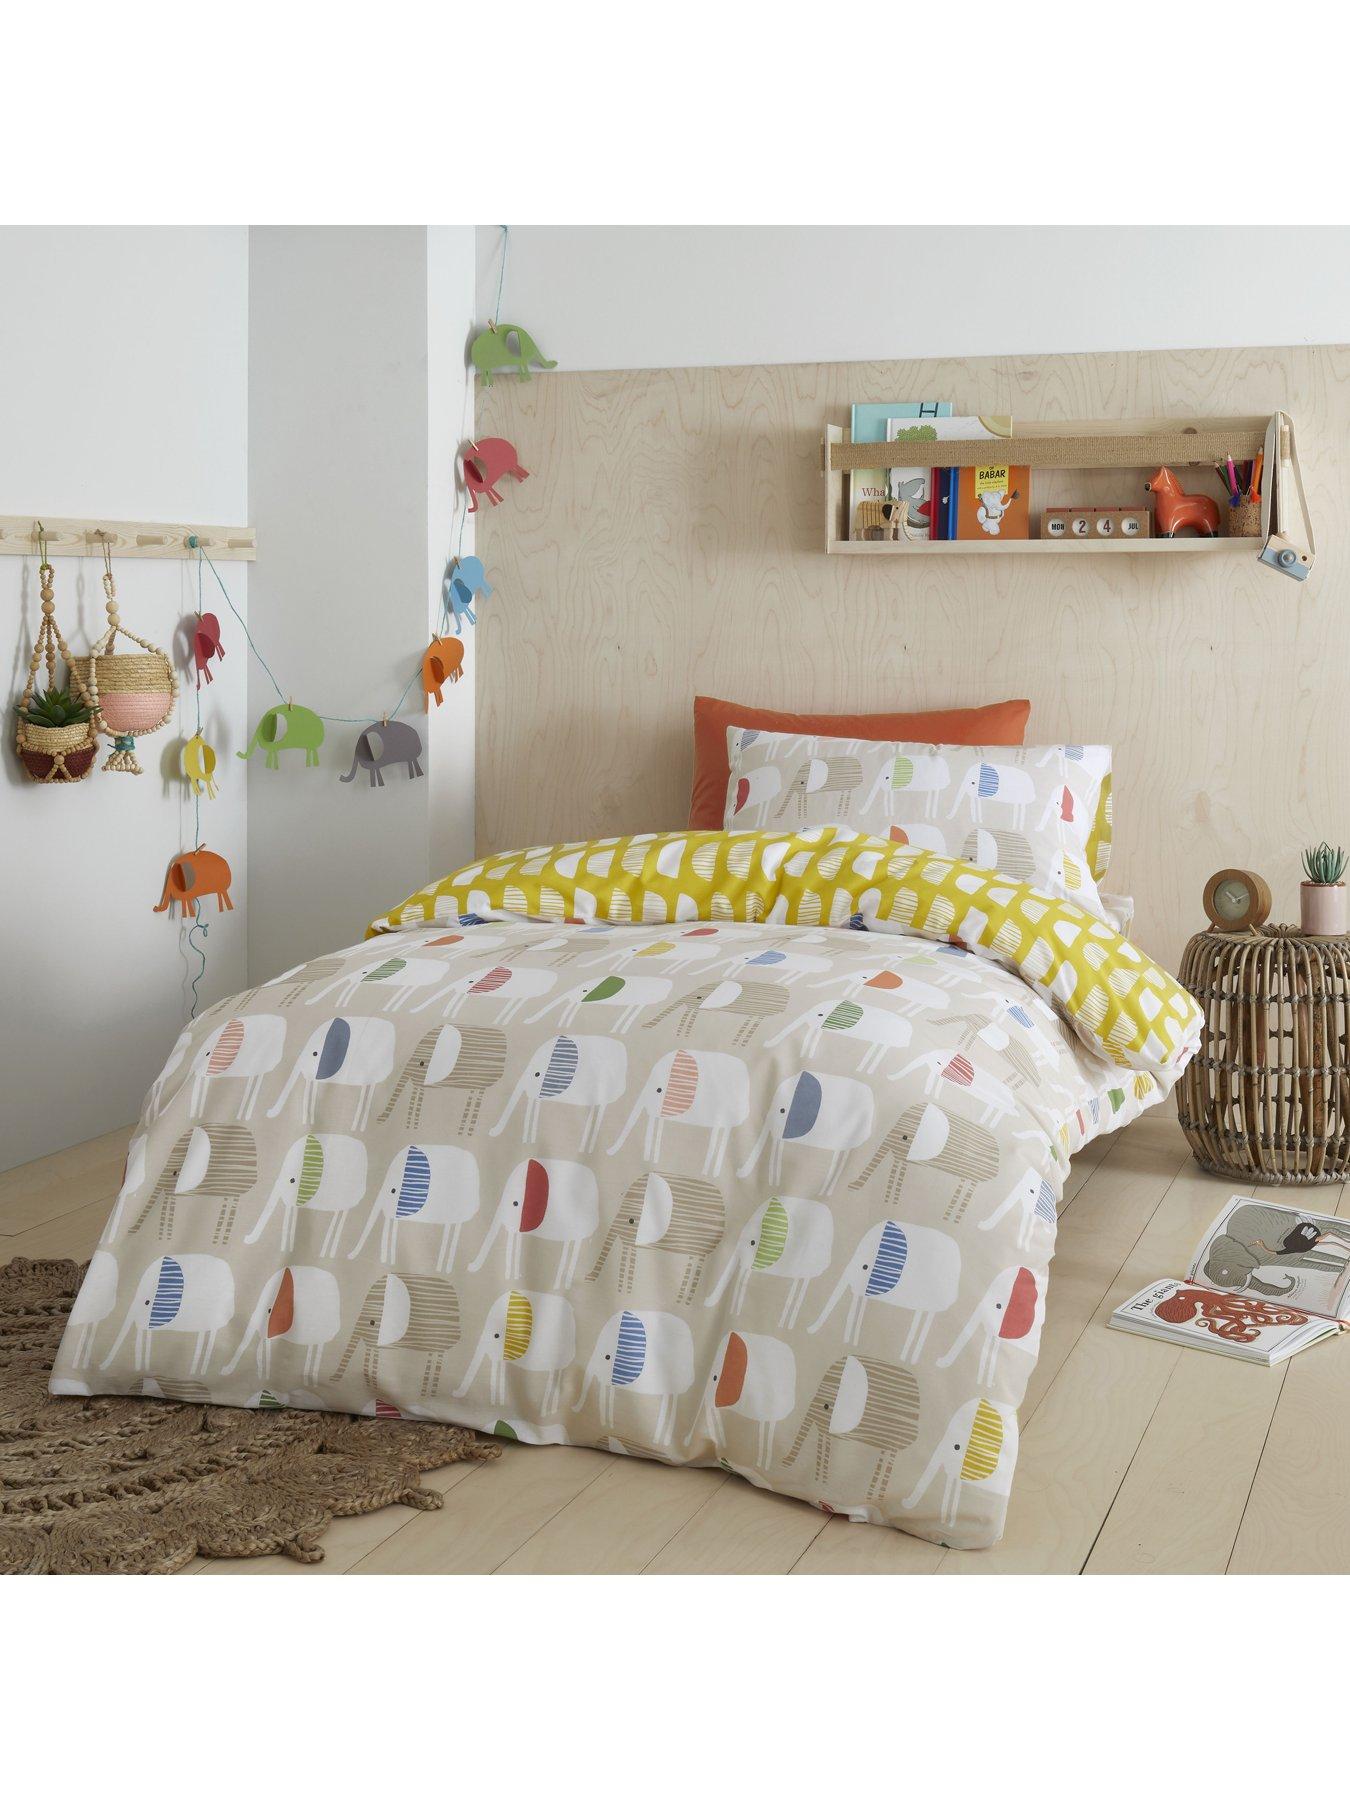 Polycotton Fun Bedding with Matching Pillow Case Multi Coloured 200 x 135cm Reversible Two Sided Beach Design Single Duvet Animal Crossing Official Single Duvet Cover 